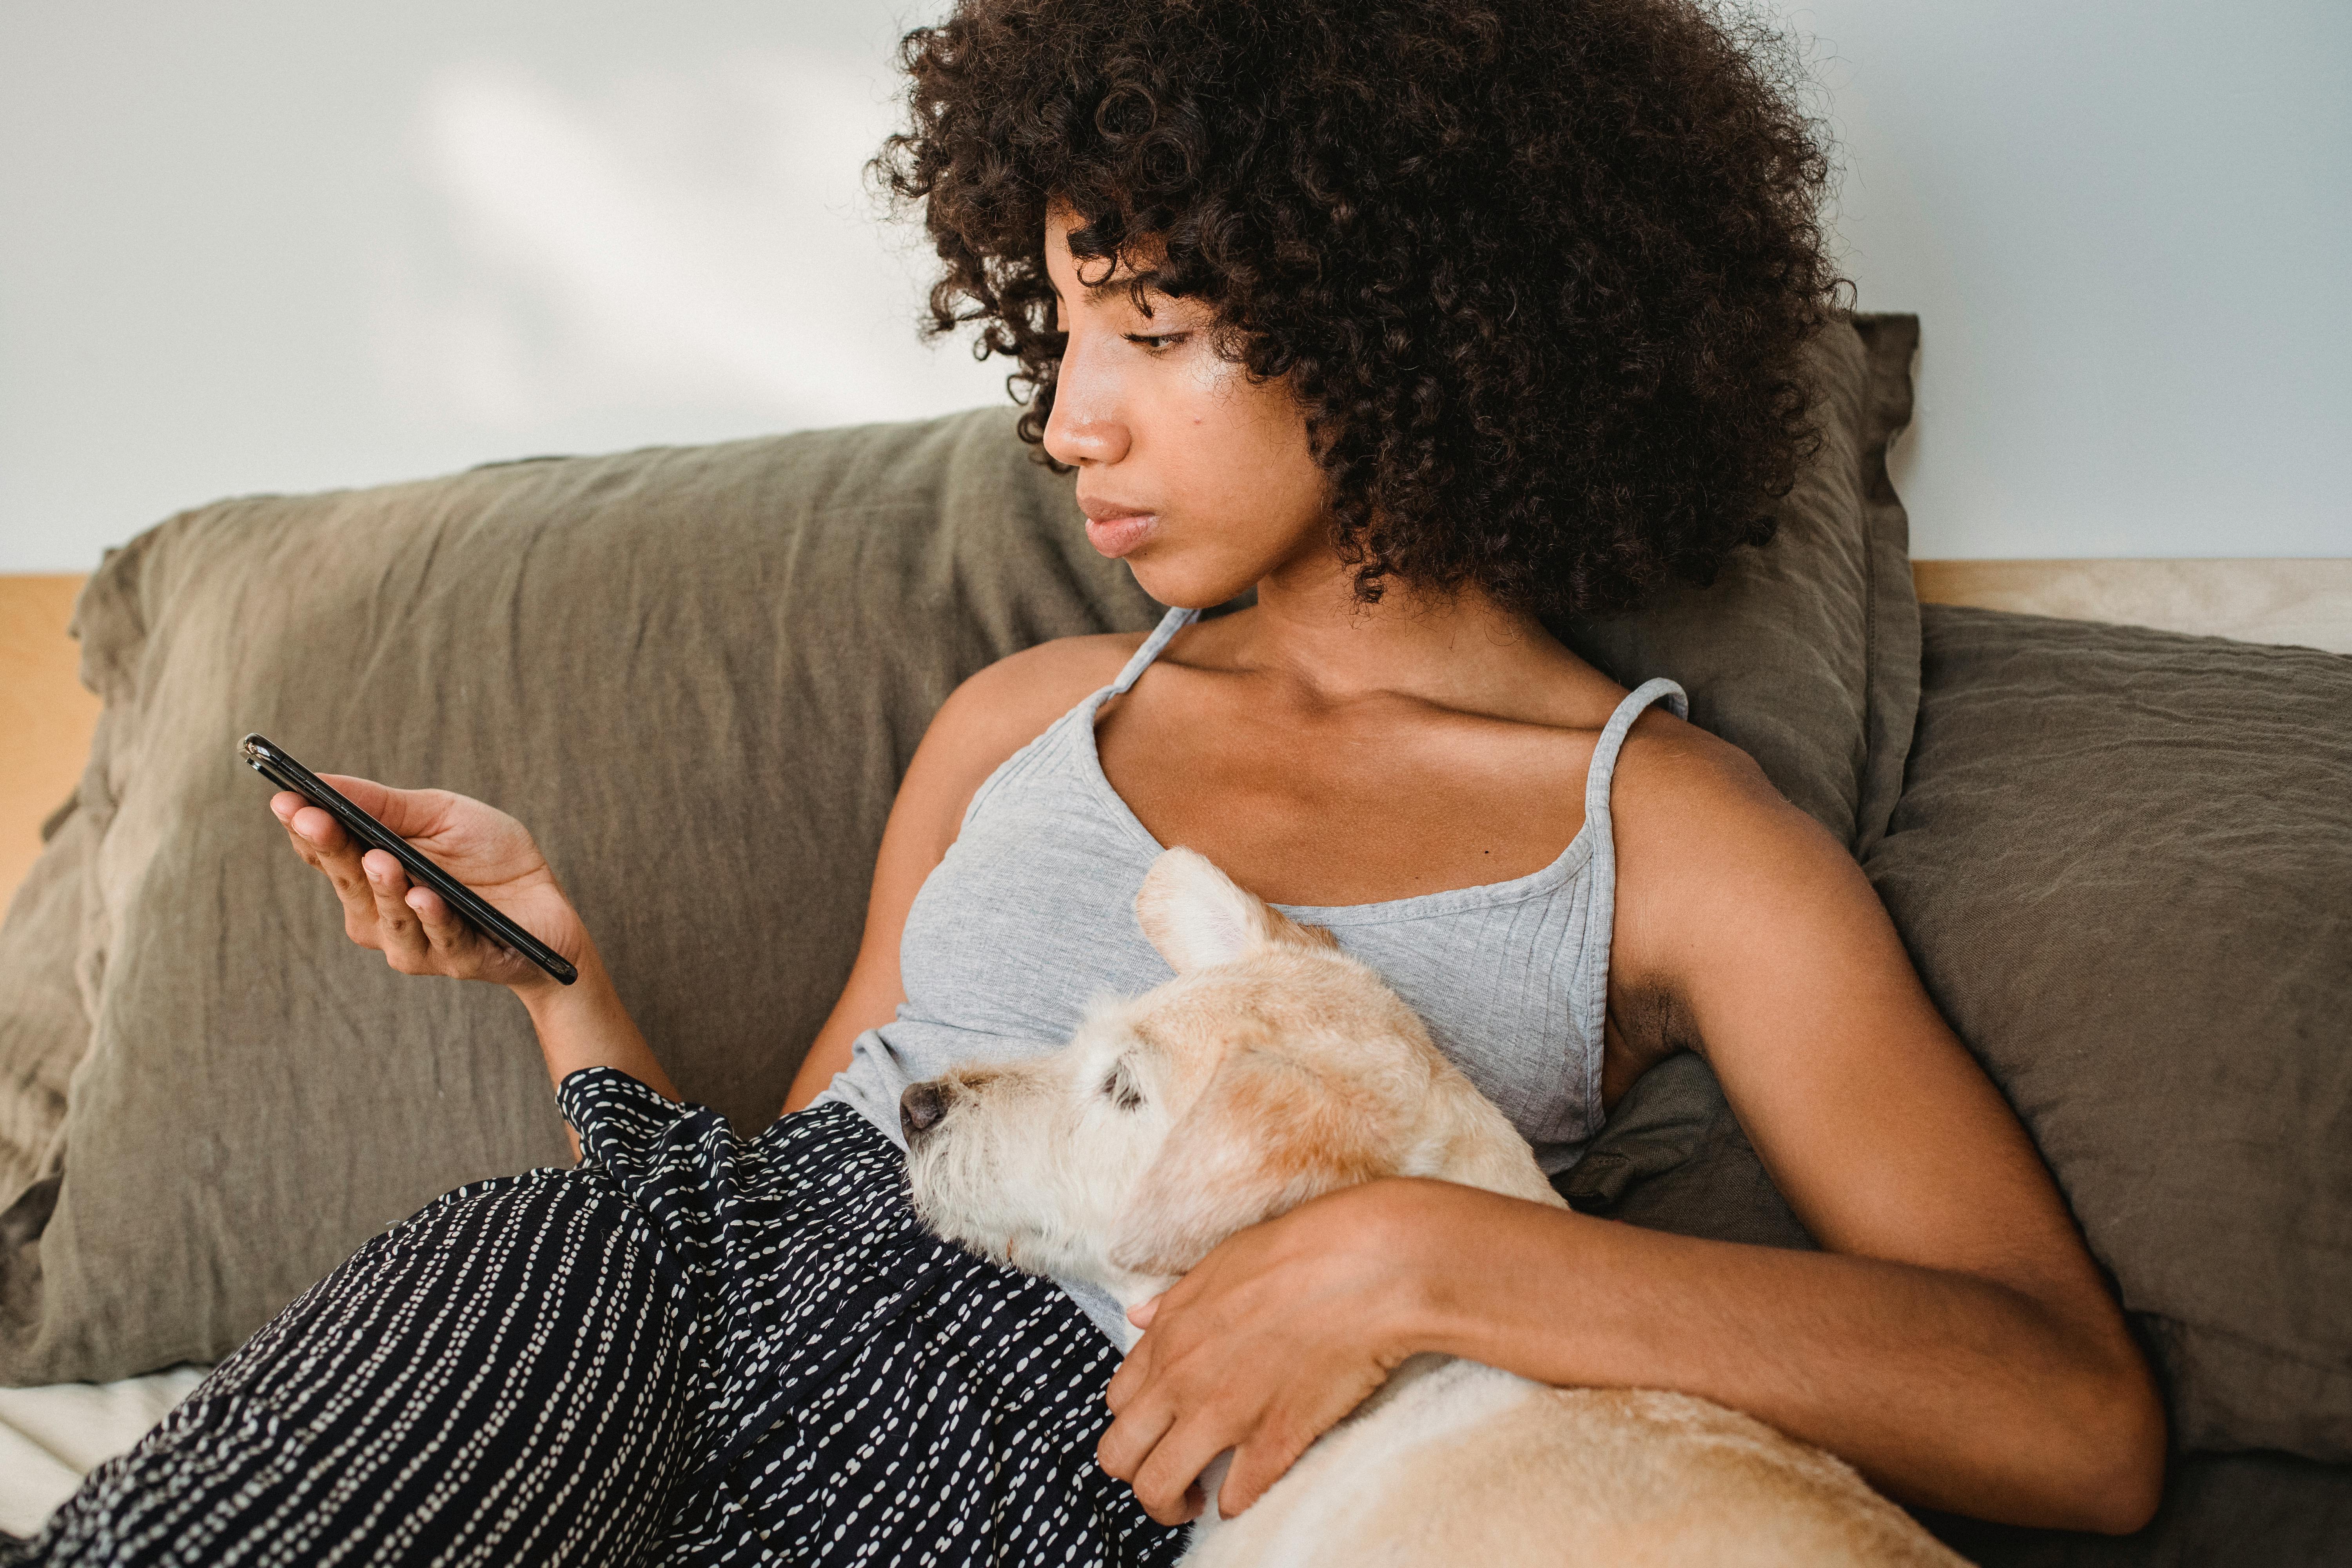 crop black woman watching smartphone while embracing dog on bed